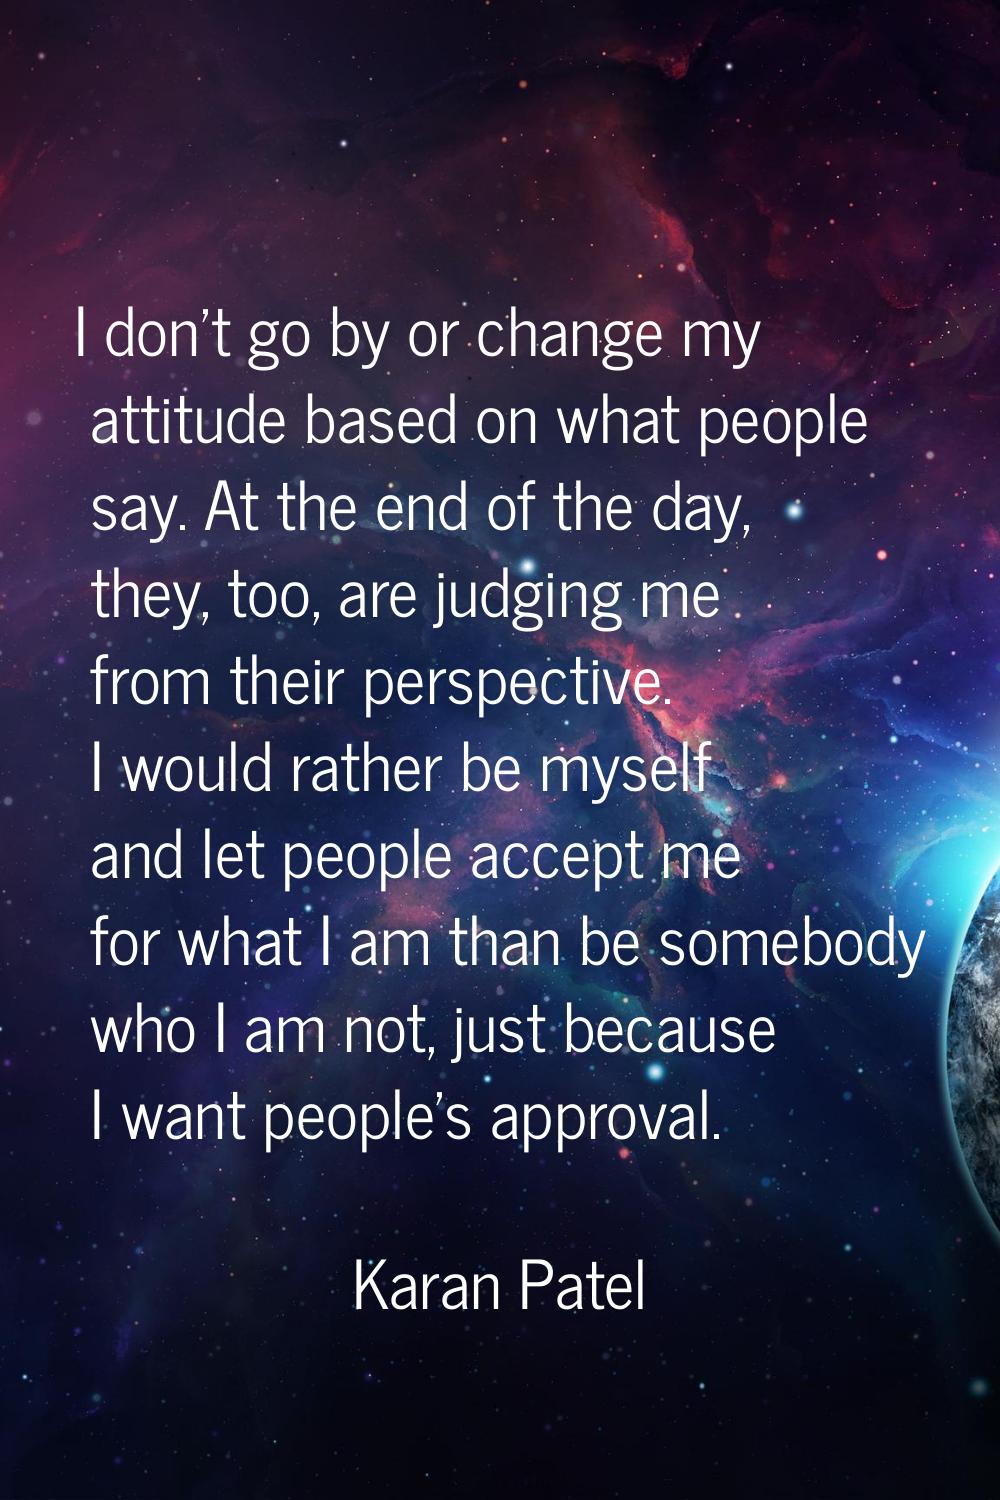 I don't go by or change my attitude based on what people say. At the end of the day, they, too, are